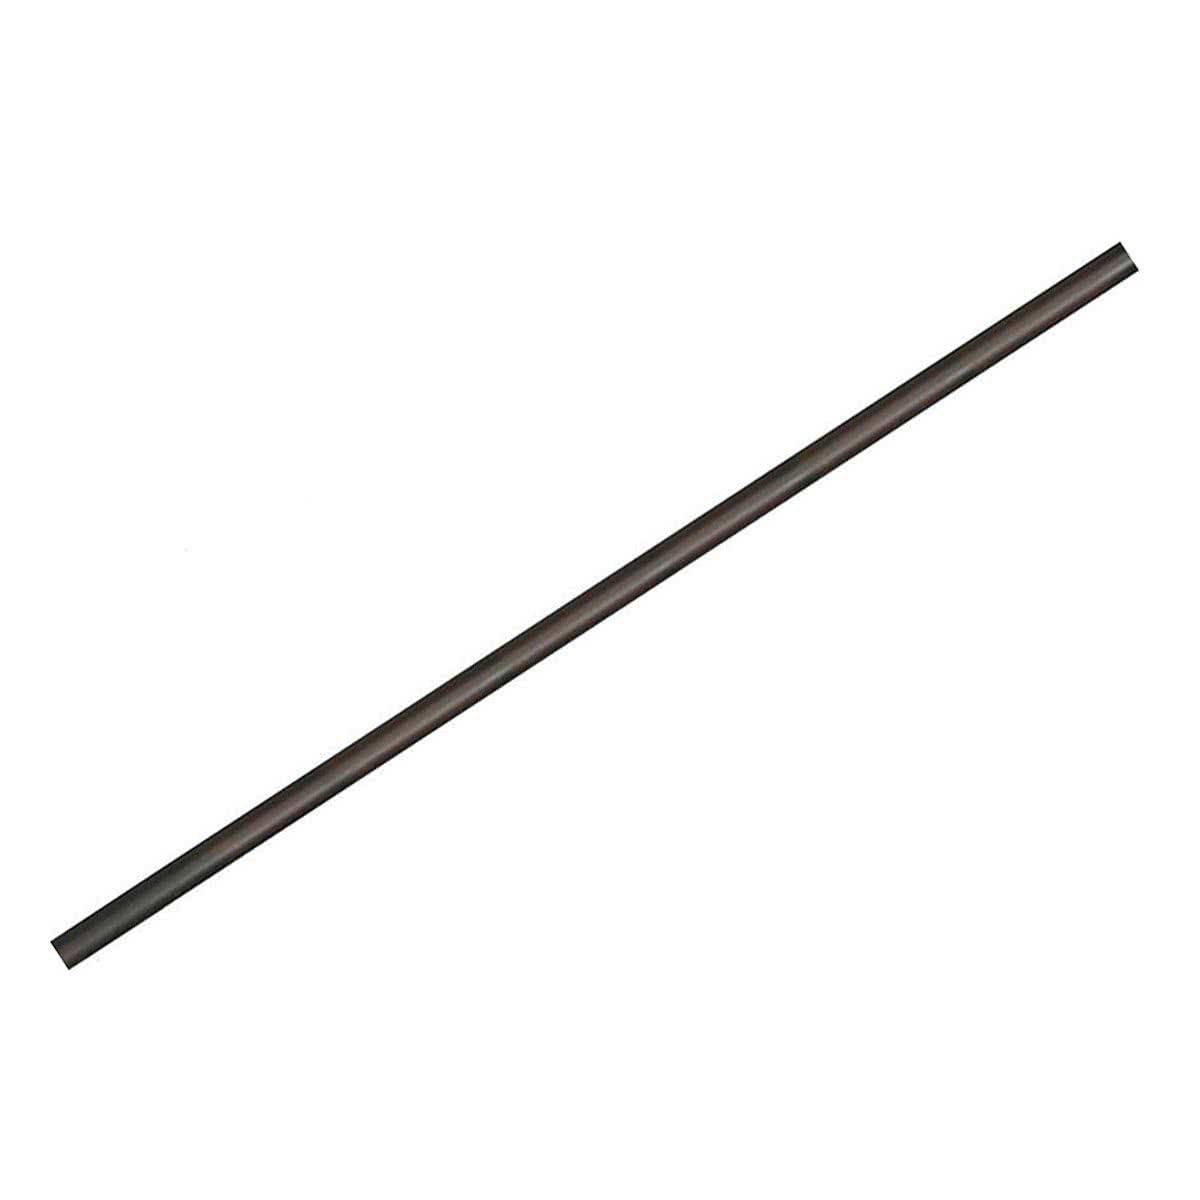 900mm Extension Rod for Mercury Series